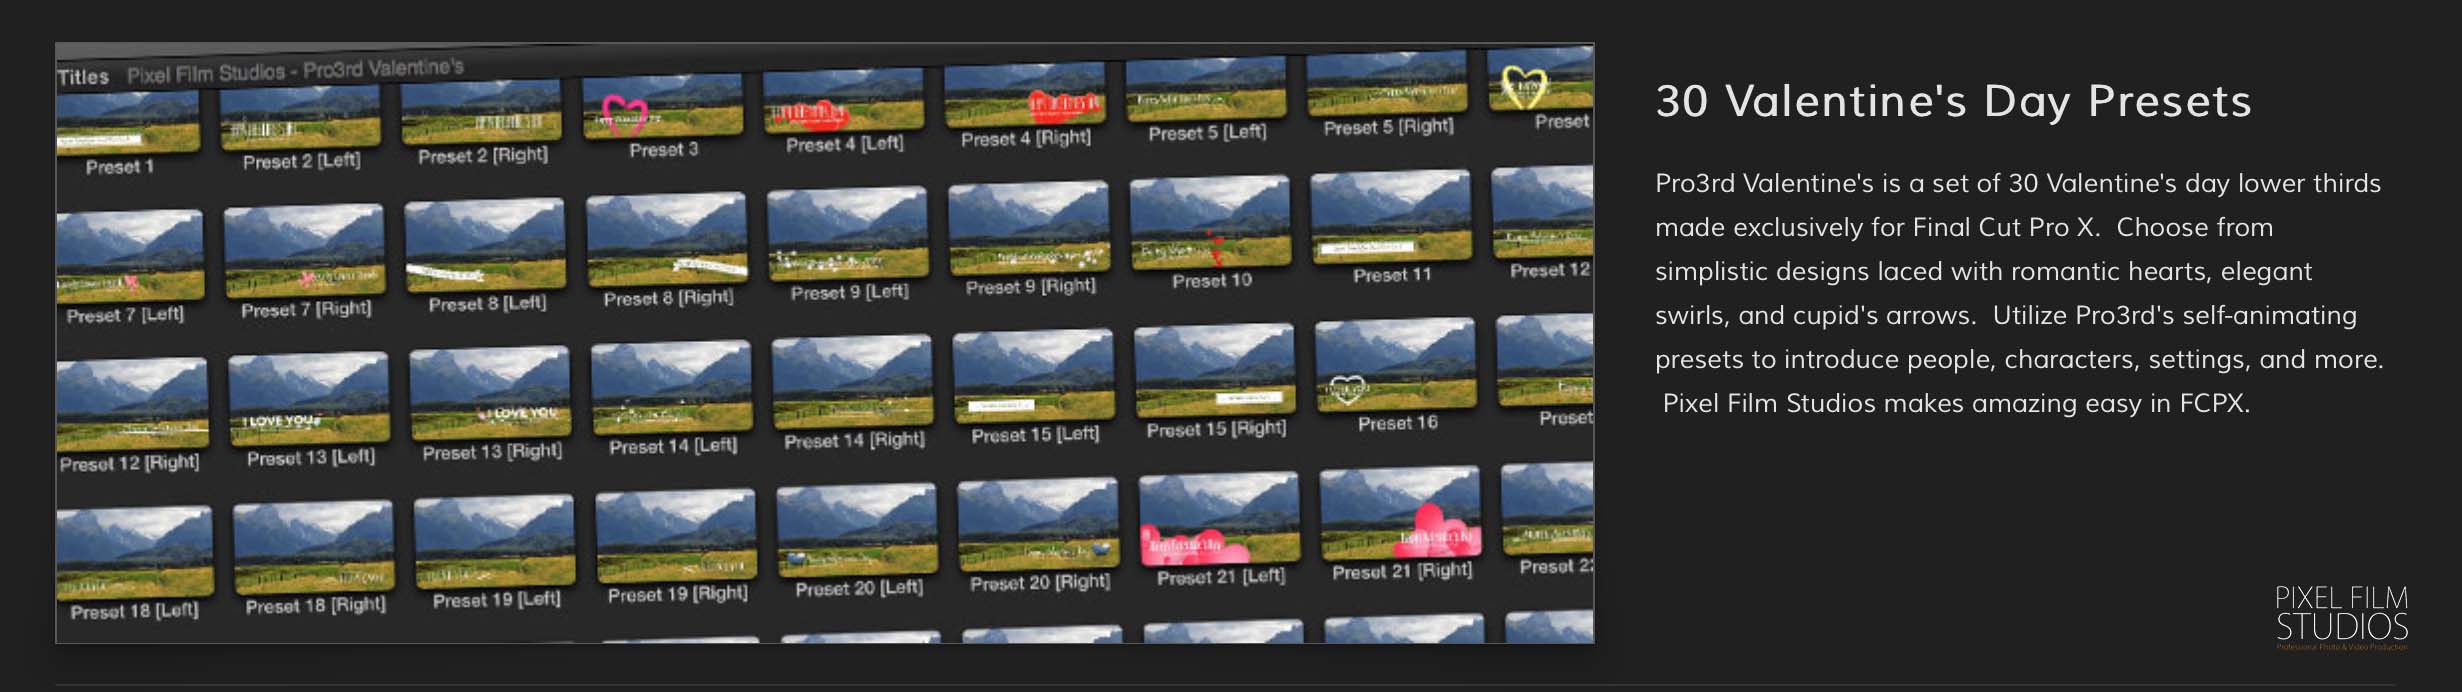 Pro3rd Valentines Lower Third pack for Final Cut Pro X from Pixel Film Studios